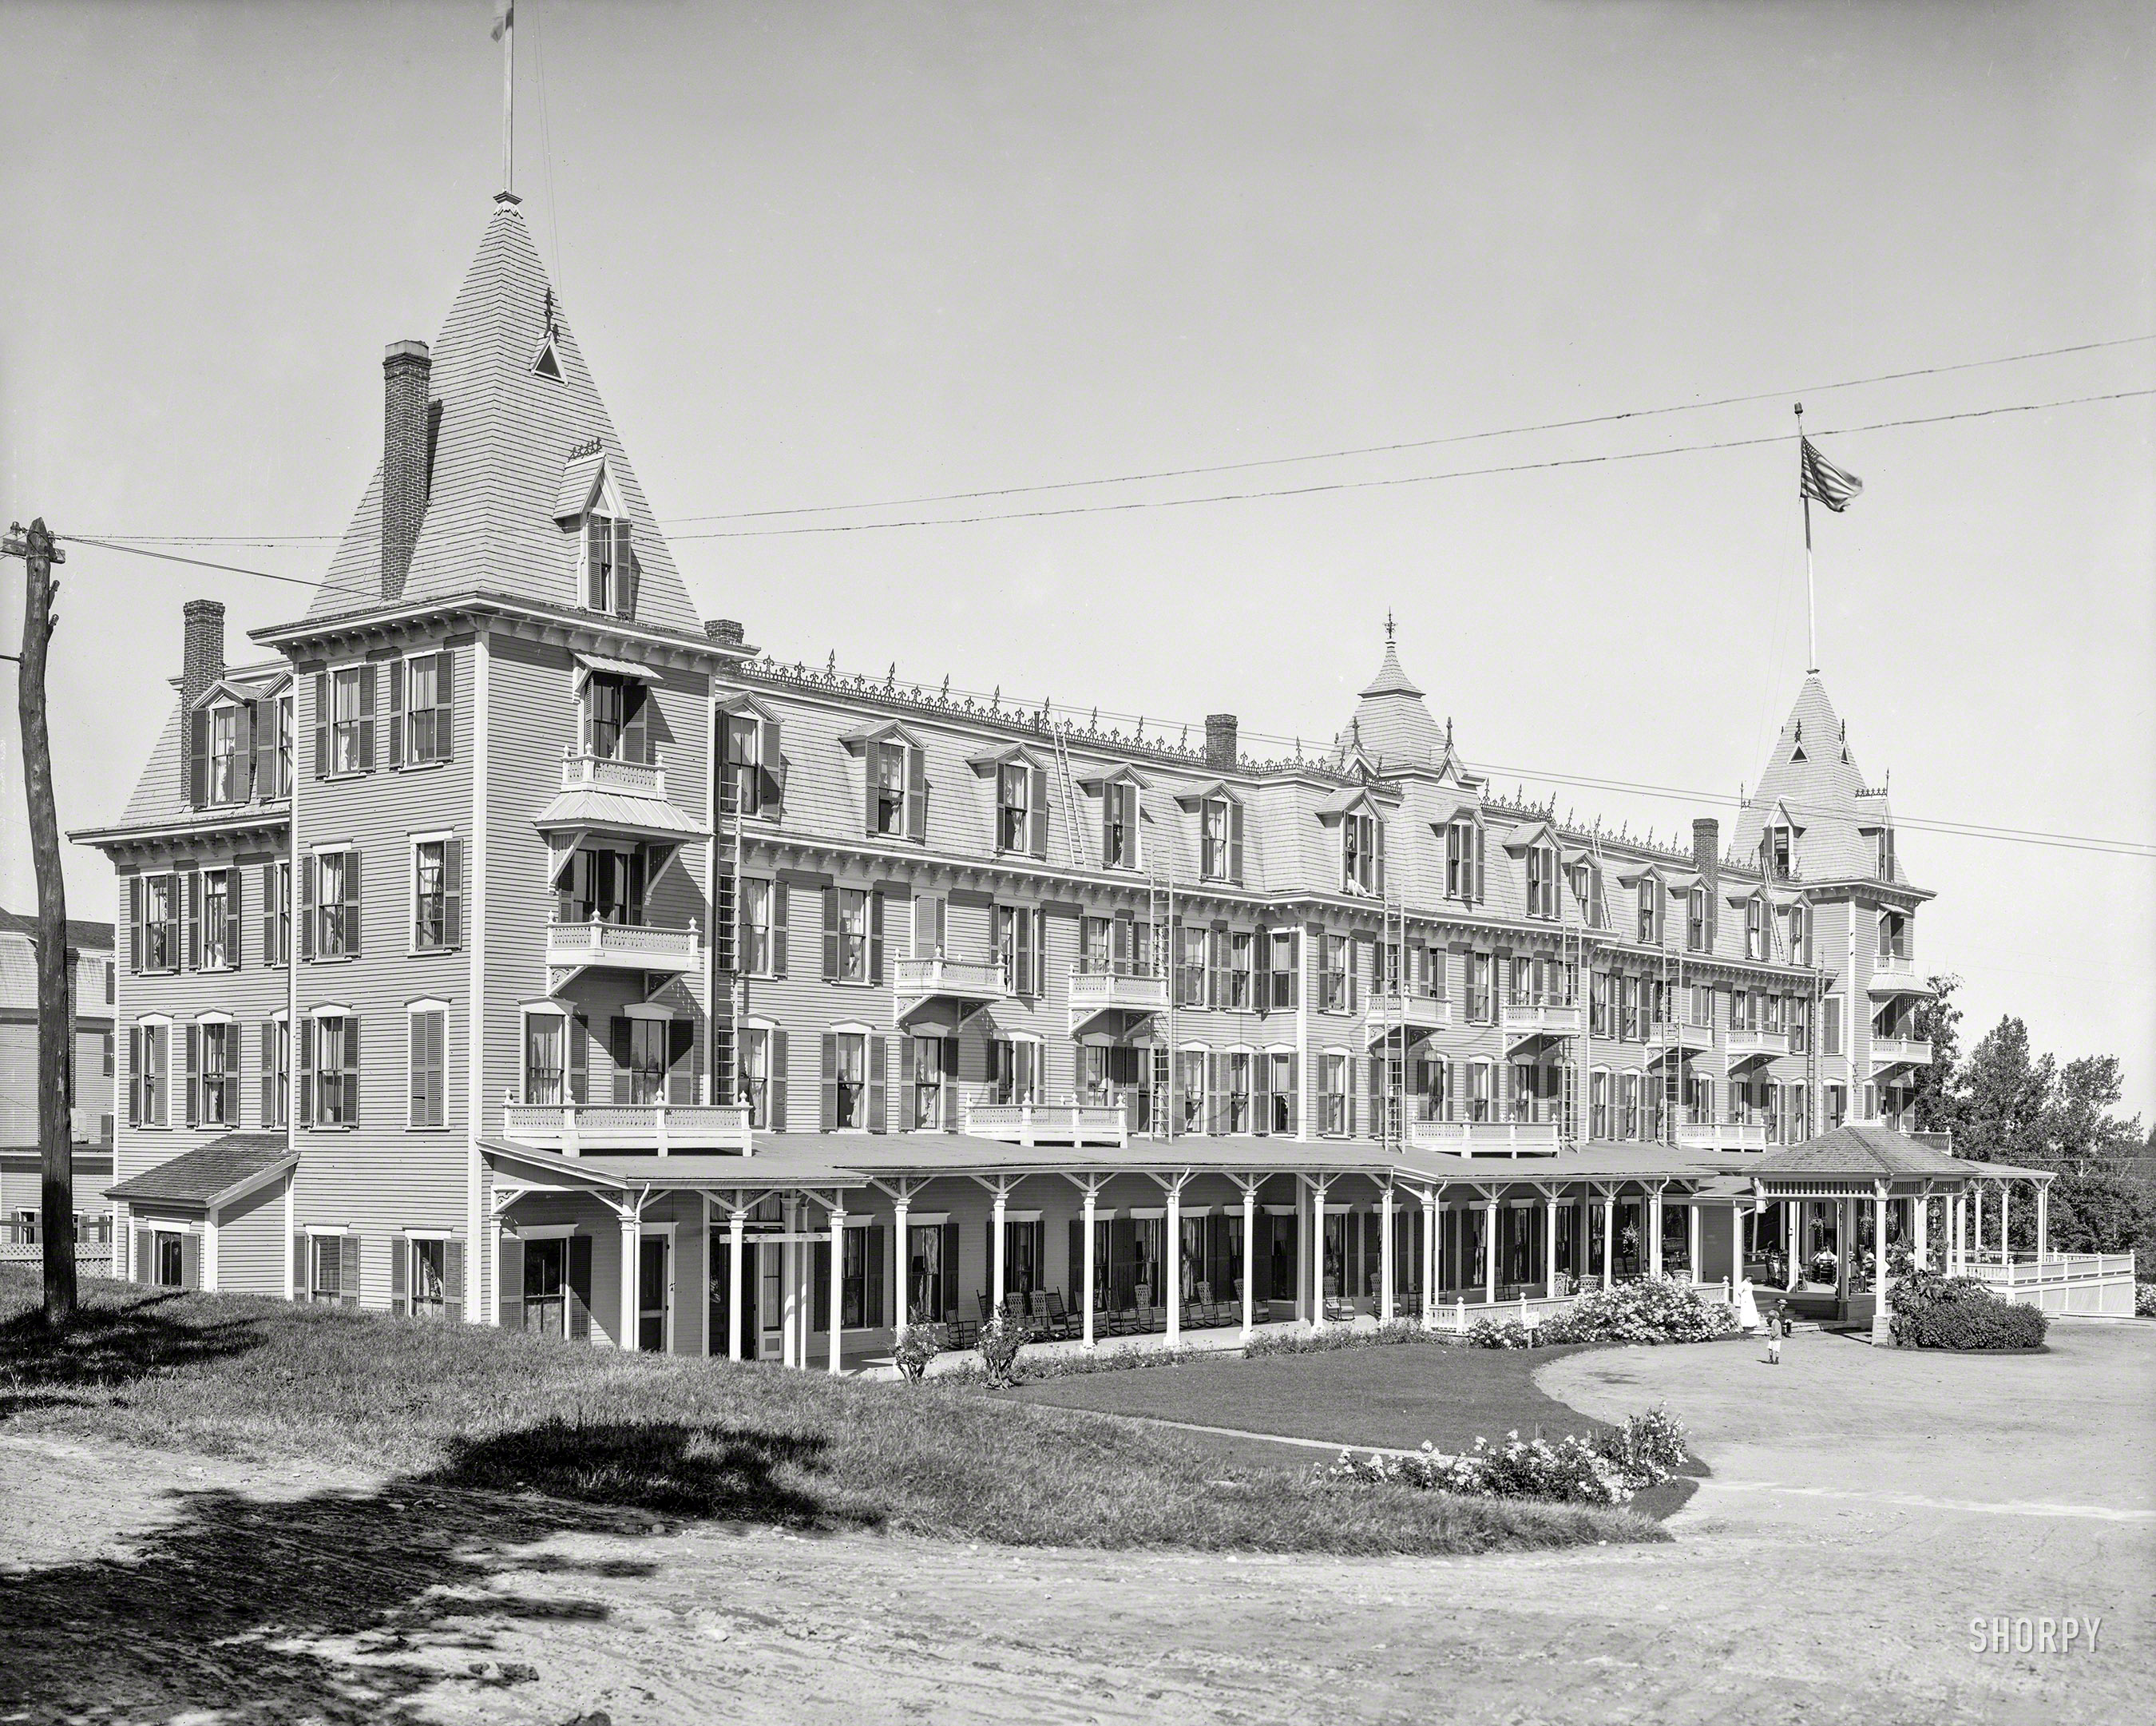 New Hampshire circa 1908. "Maplewood House, Bethlehem, White Mountains." Completed in 1876, this first-class New England resort burned to the ground in 1963. 8x10 inch dry plate glass negative, Detroit Publishing Co. View full size.